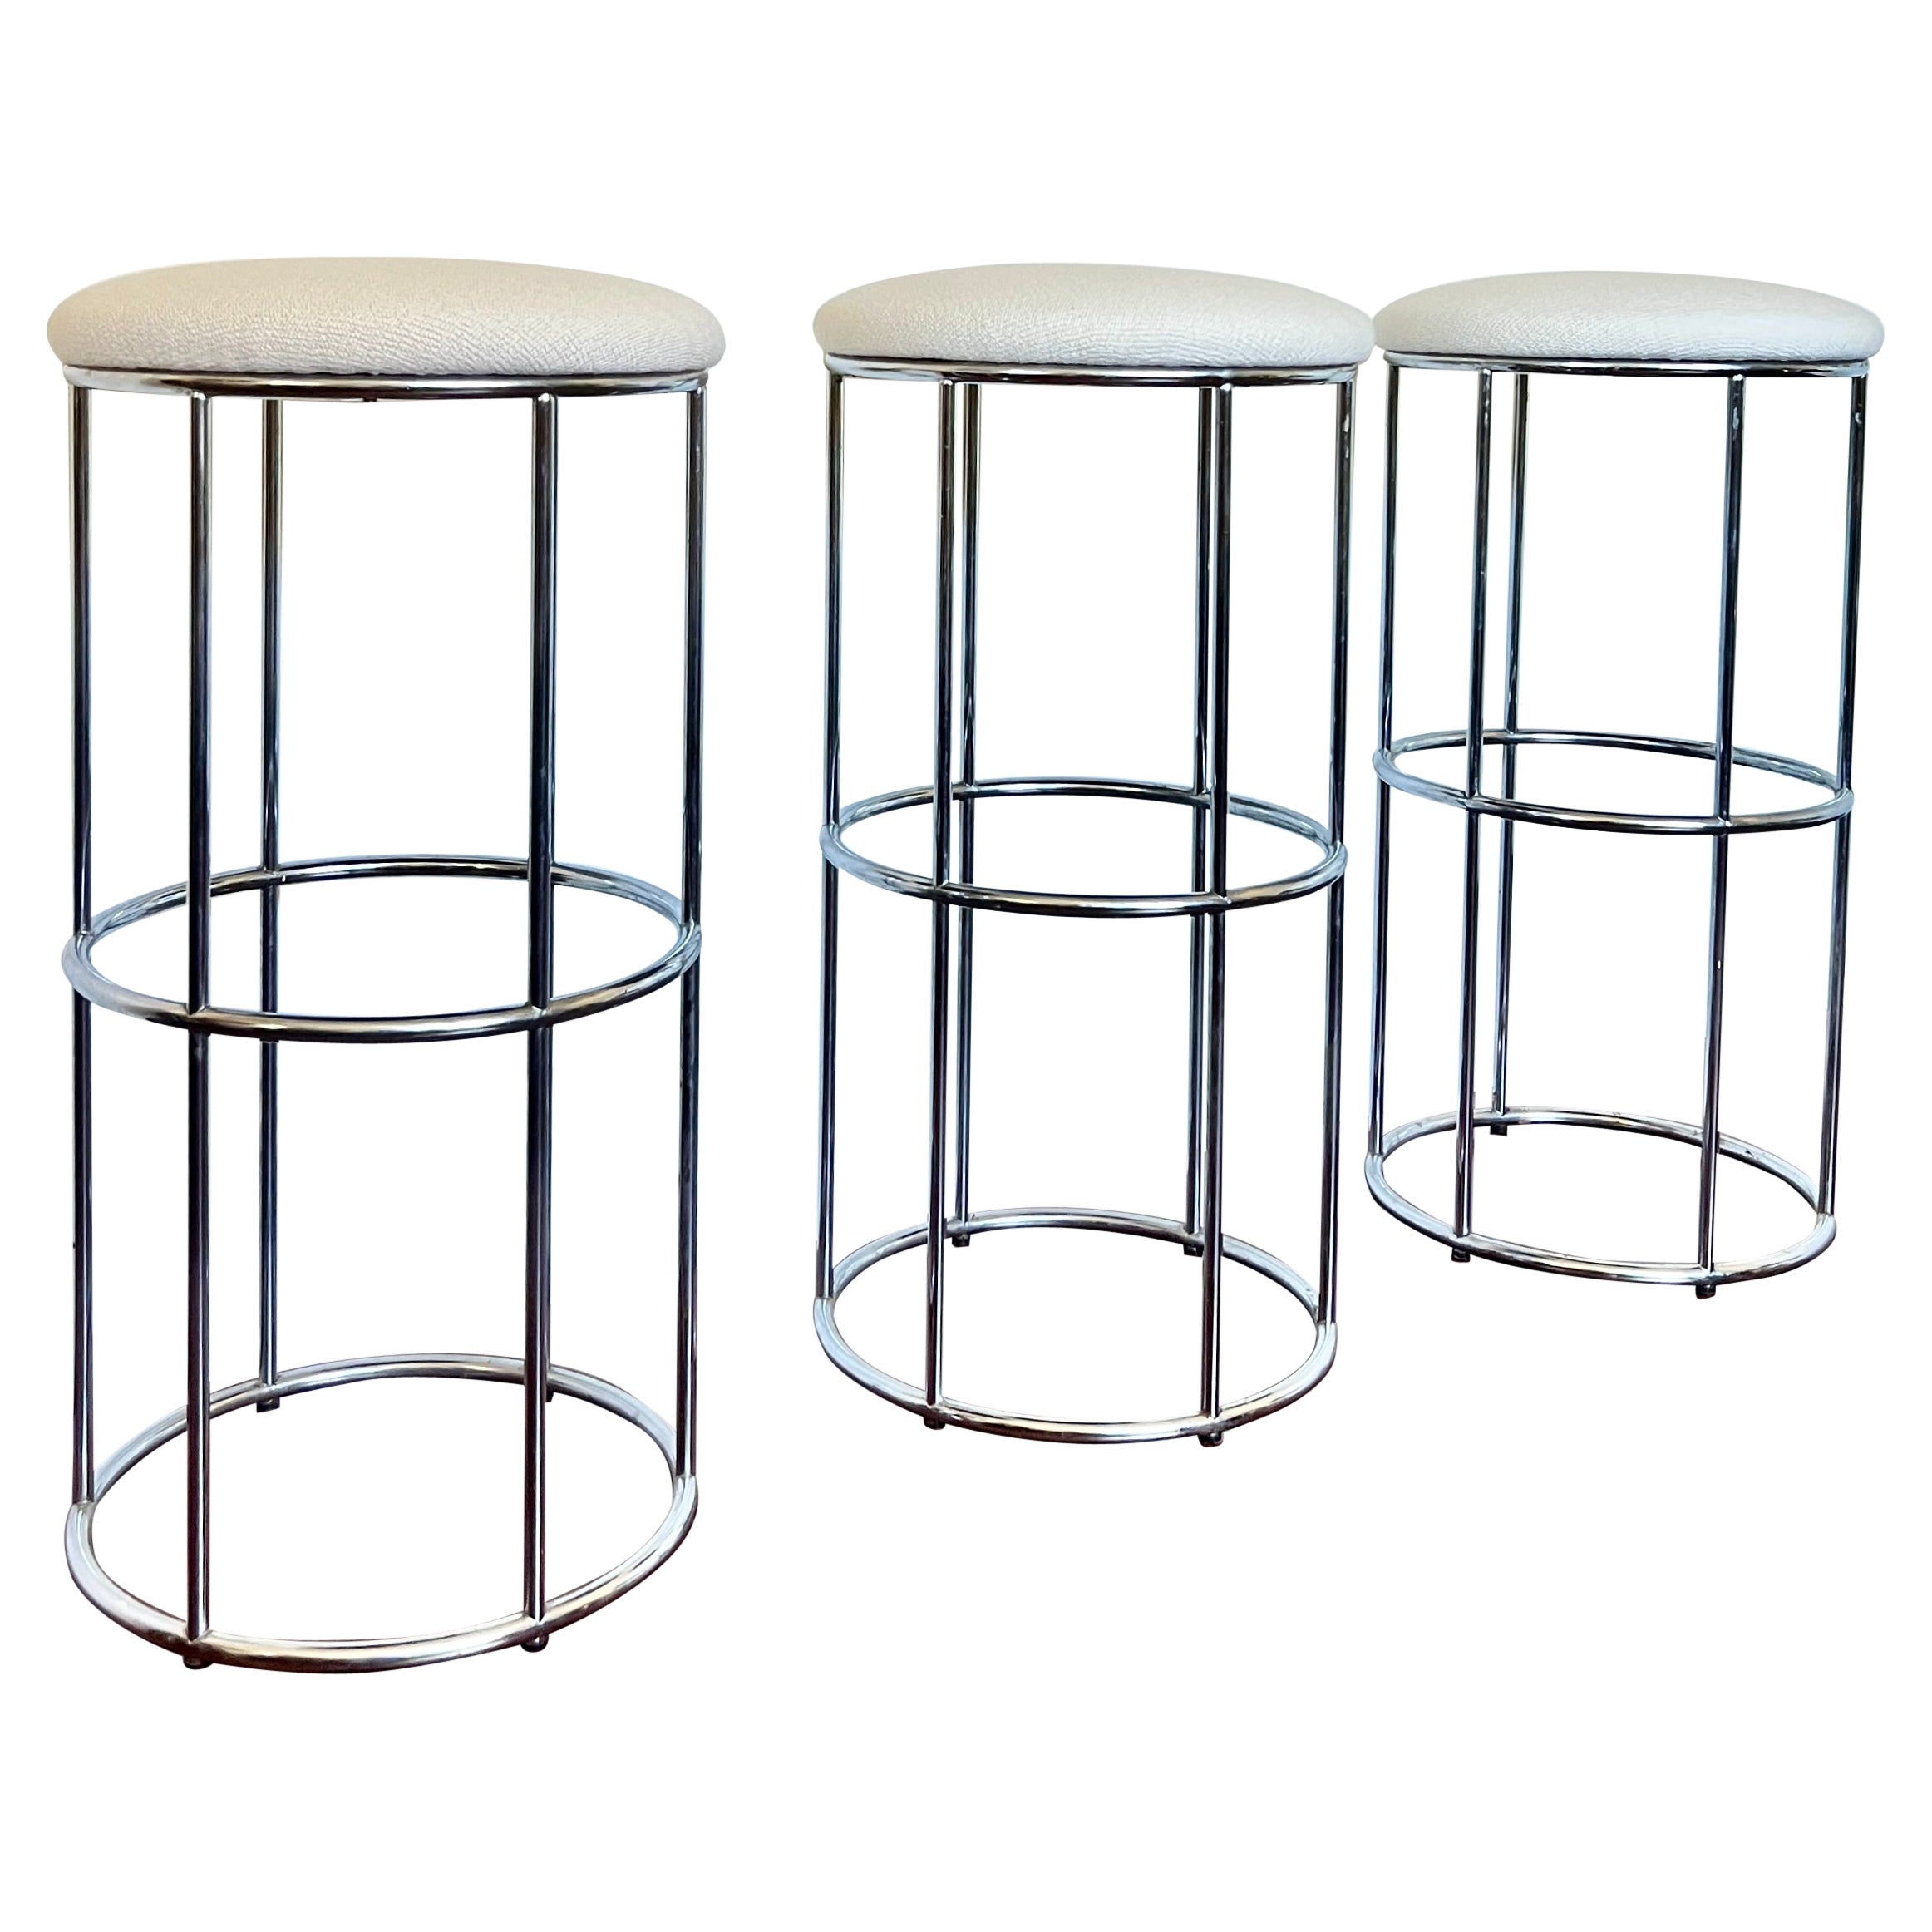 Vintage set of 3 chrome barstools newly reupholstered in an ivory boucle fabric For Sale